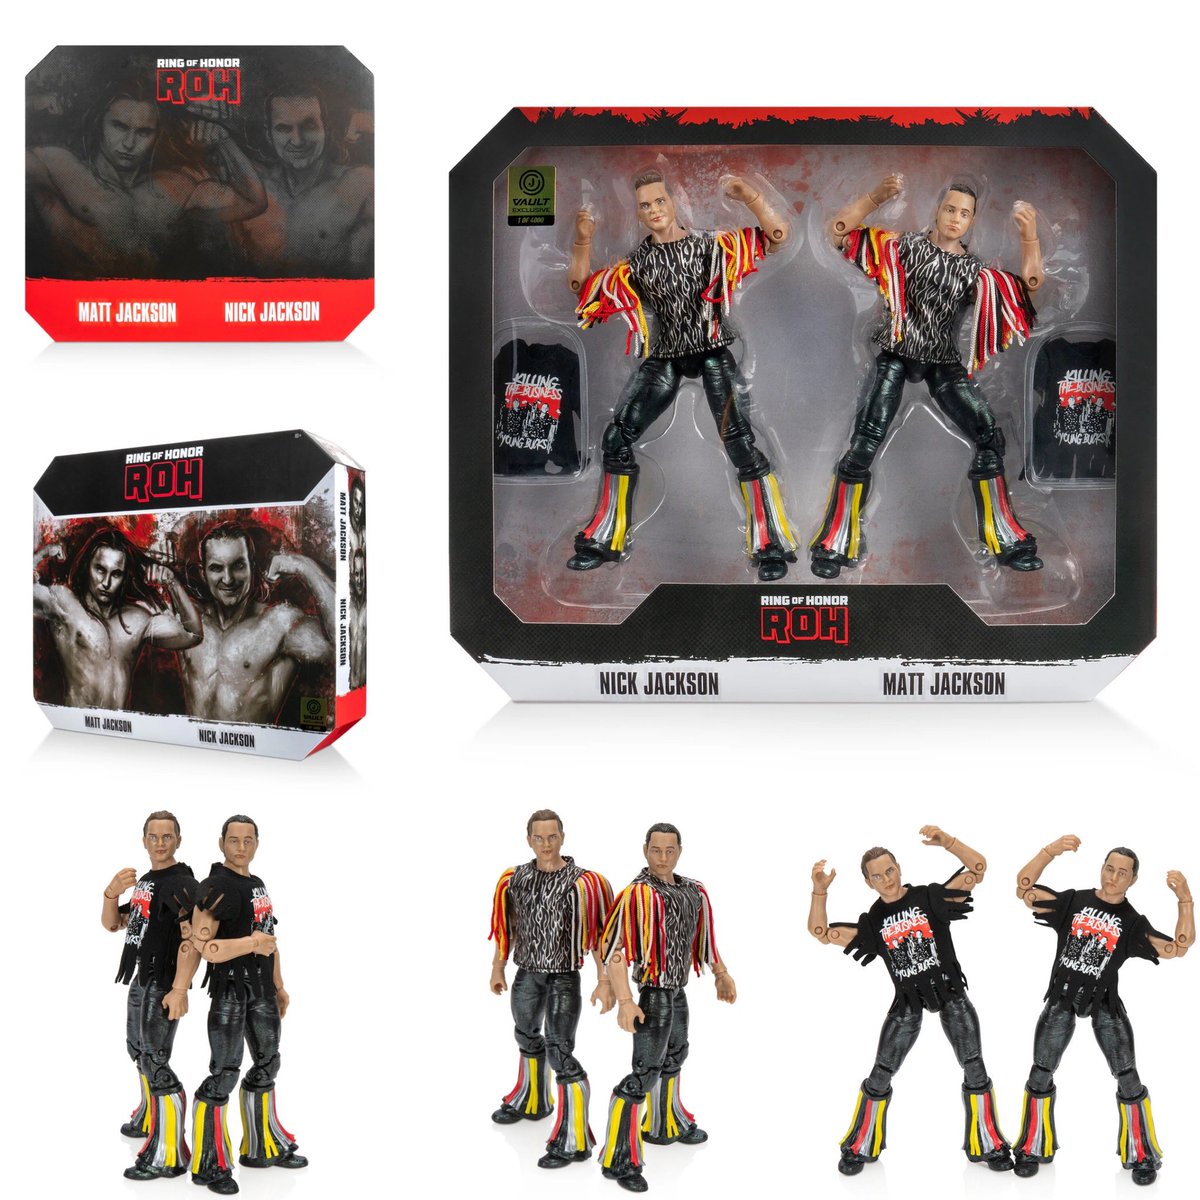 @aewbyjazwares Ring of Honor Young Bucks 1 of 5,000 action figures are available now on @jazwaresvault - use code WELCOME15 to save 15% in your first order!

#figheel #actionfigures #toycommunity #toycollector #wrestlingfigures #wwe #aew #njpw #tna